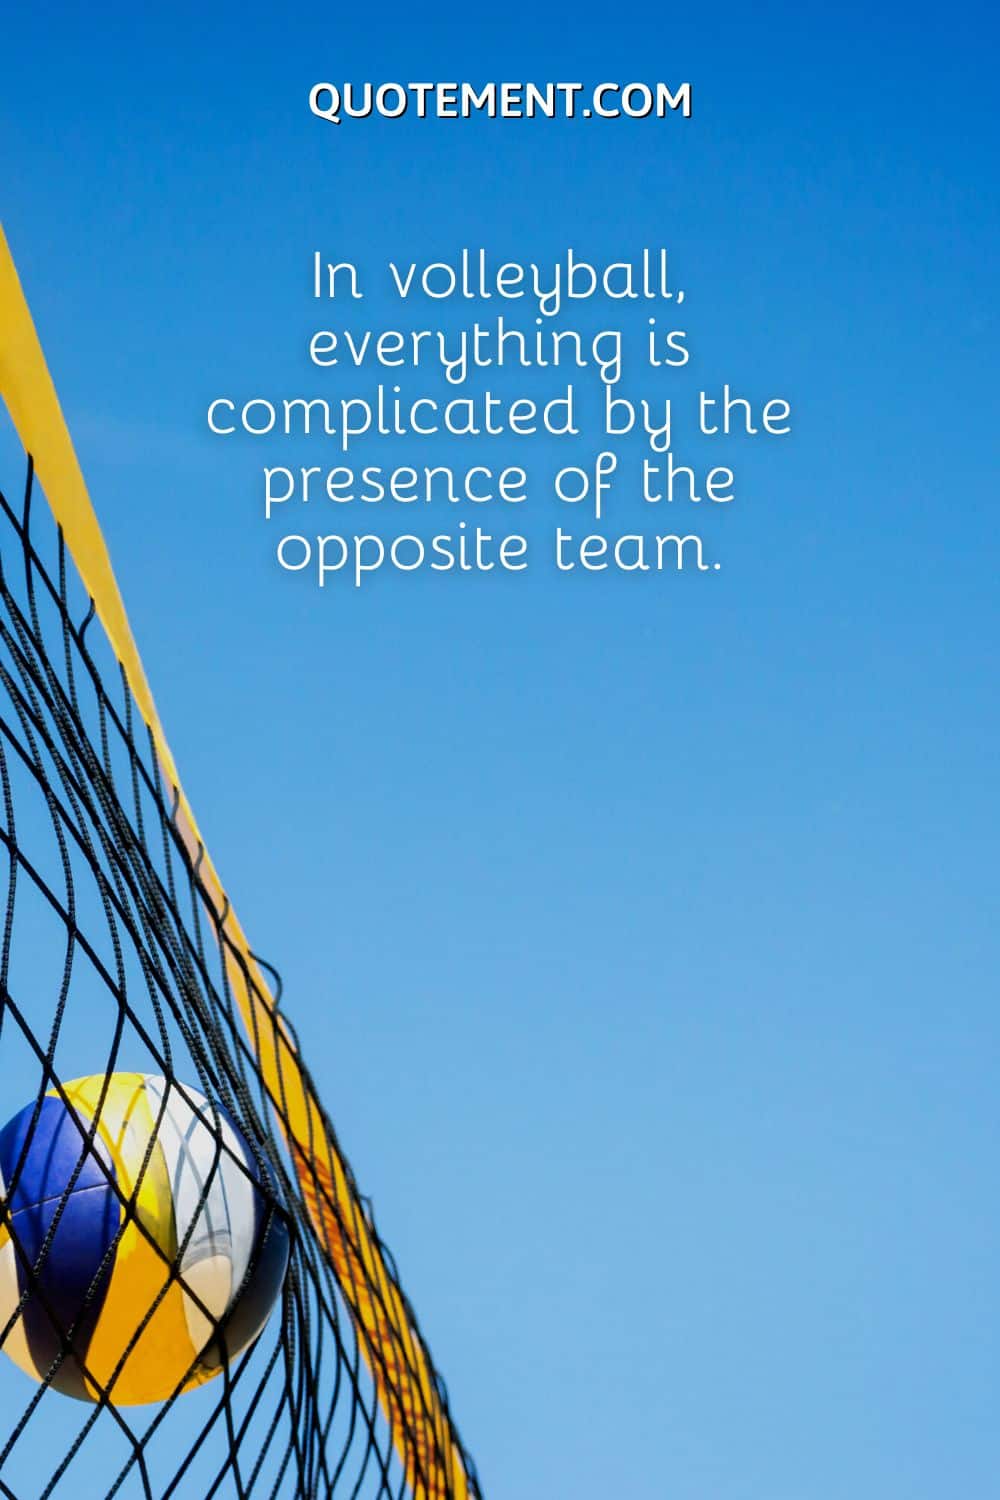 In volleyball, everything is complicated by the presence of the opposite team.